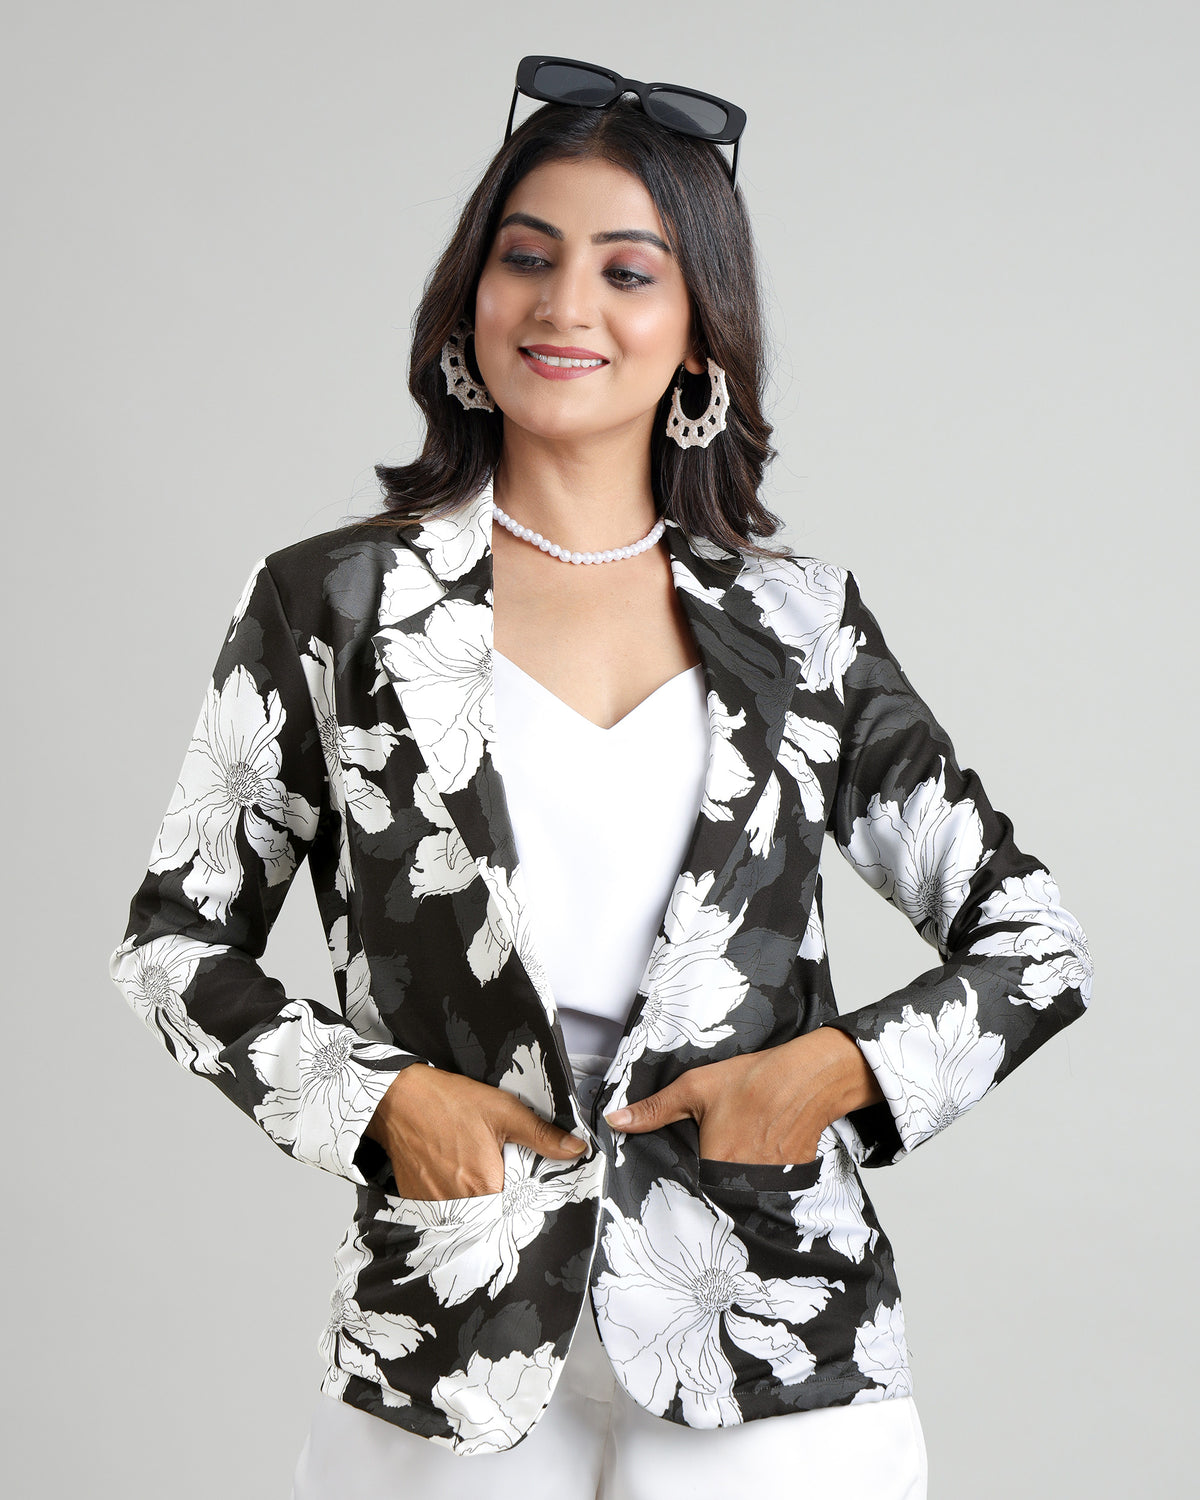 Classic With Twist: Black And White Floral Jacket